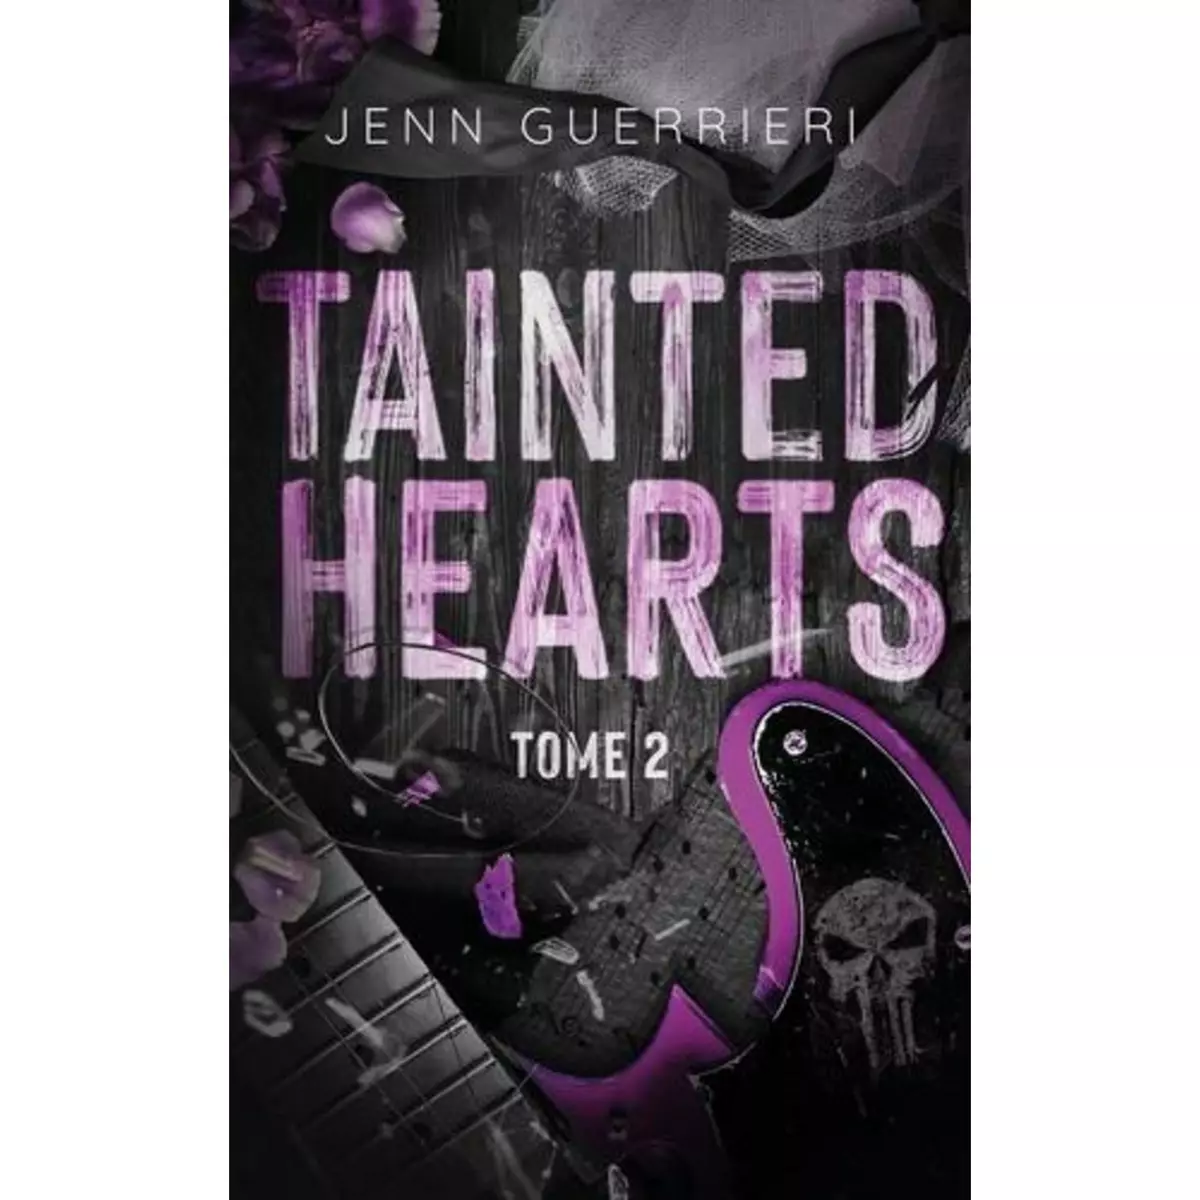  TAINTED HEARTS TOME 2 , Guerrieri Jenn